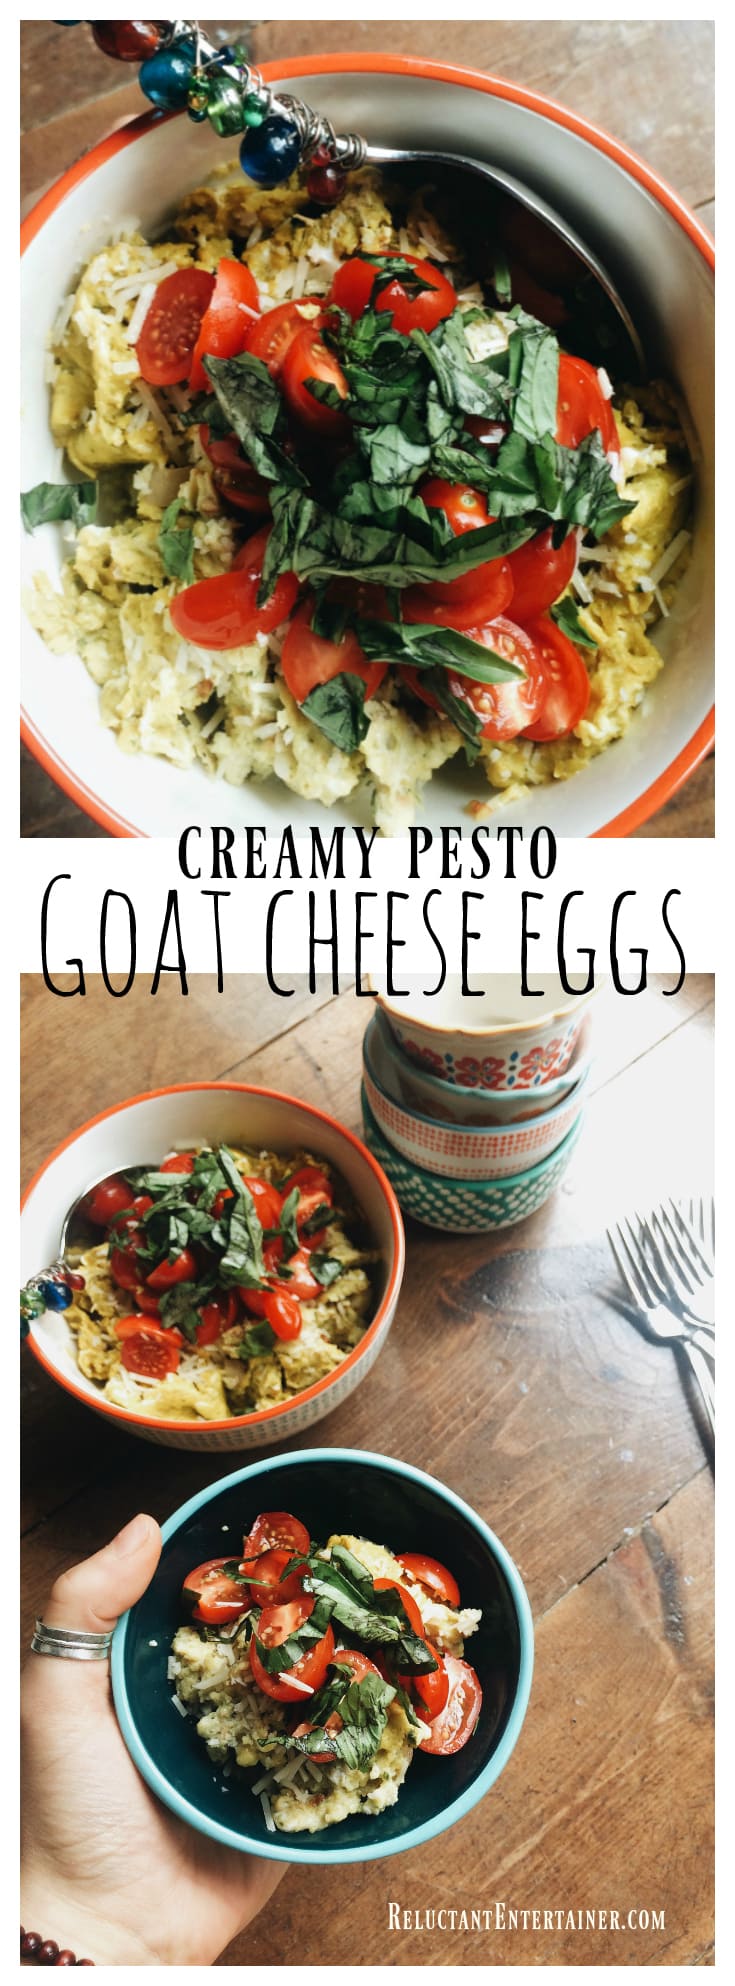 Creamy Pesto Goat Cheese Eggs are a delicious dish to serve with fresh tomatoes and basil, perfect for a weekend breakfast or brunch!